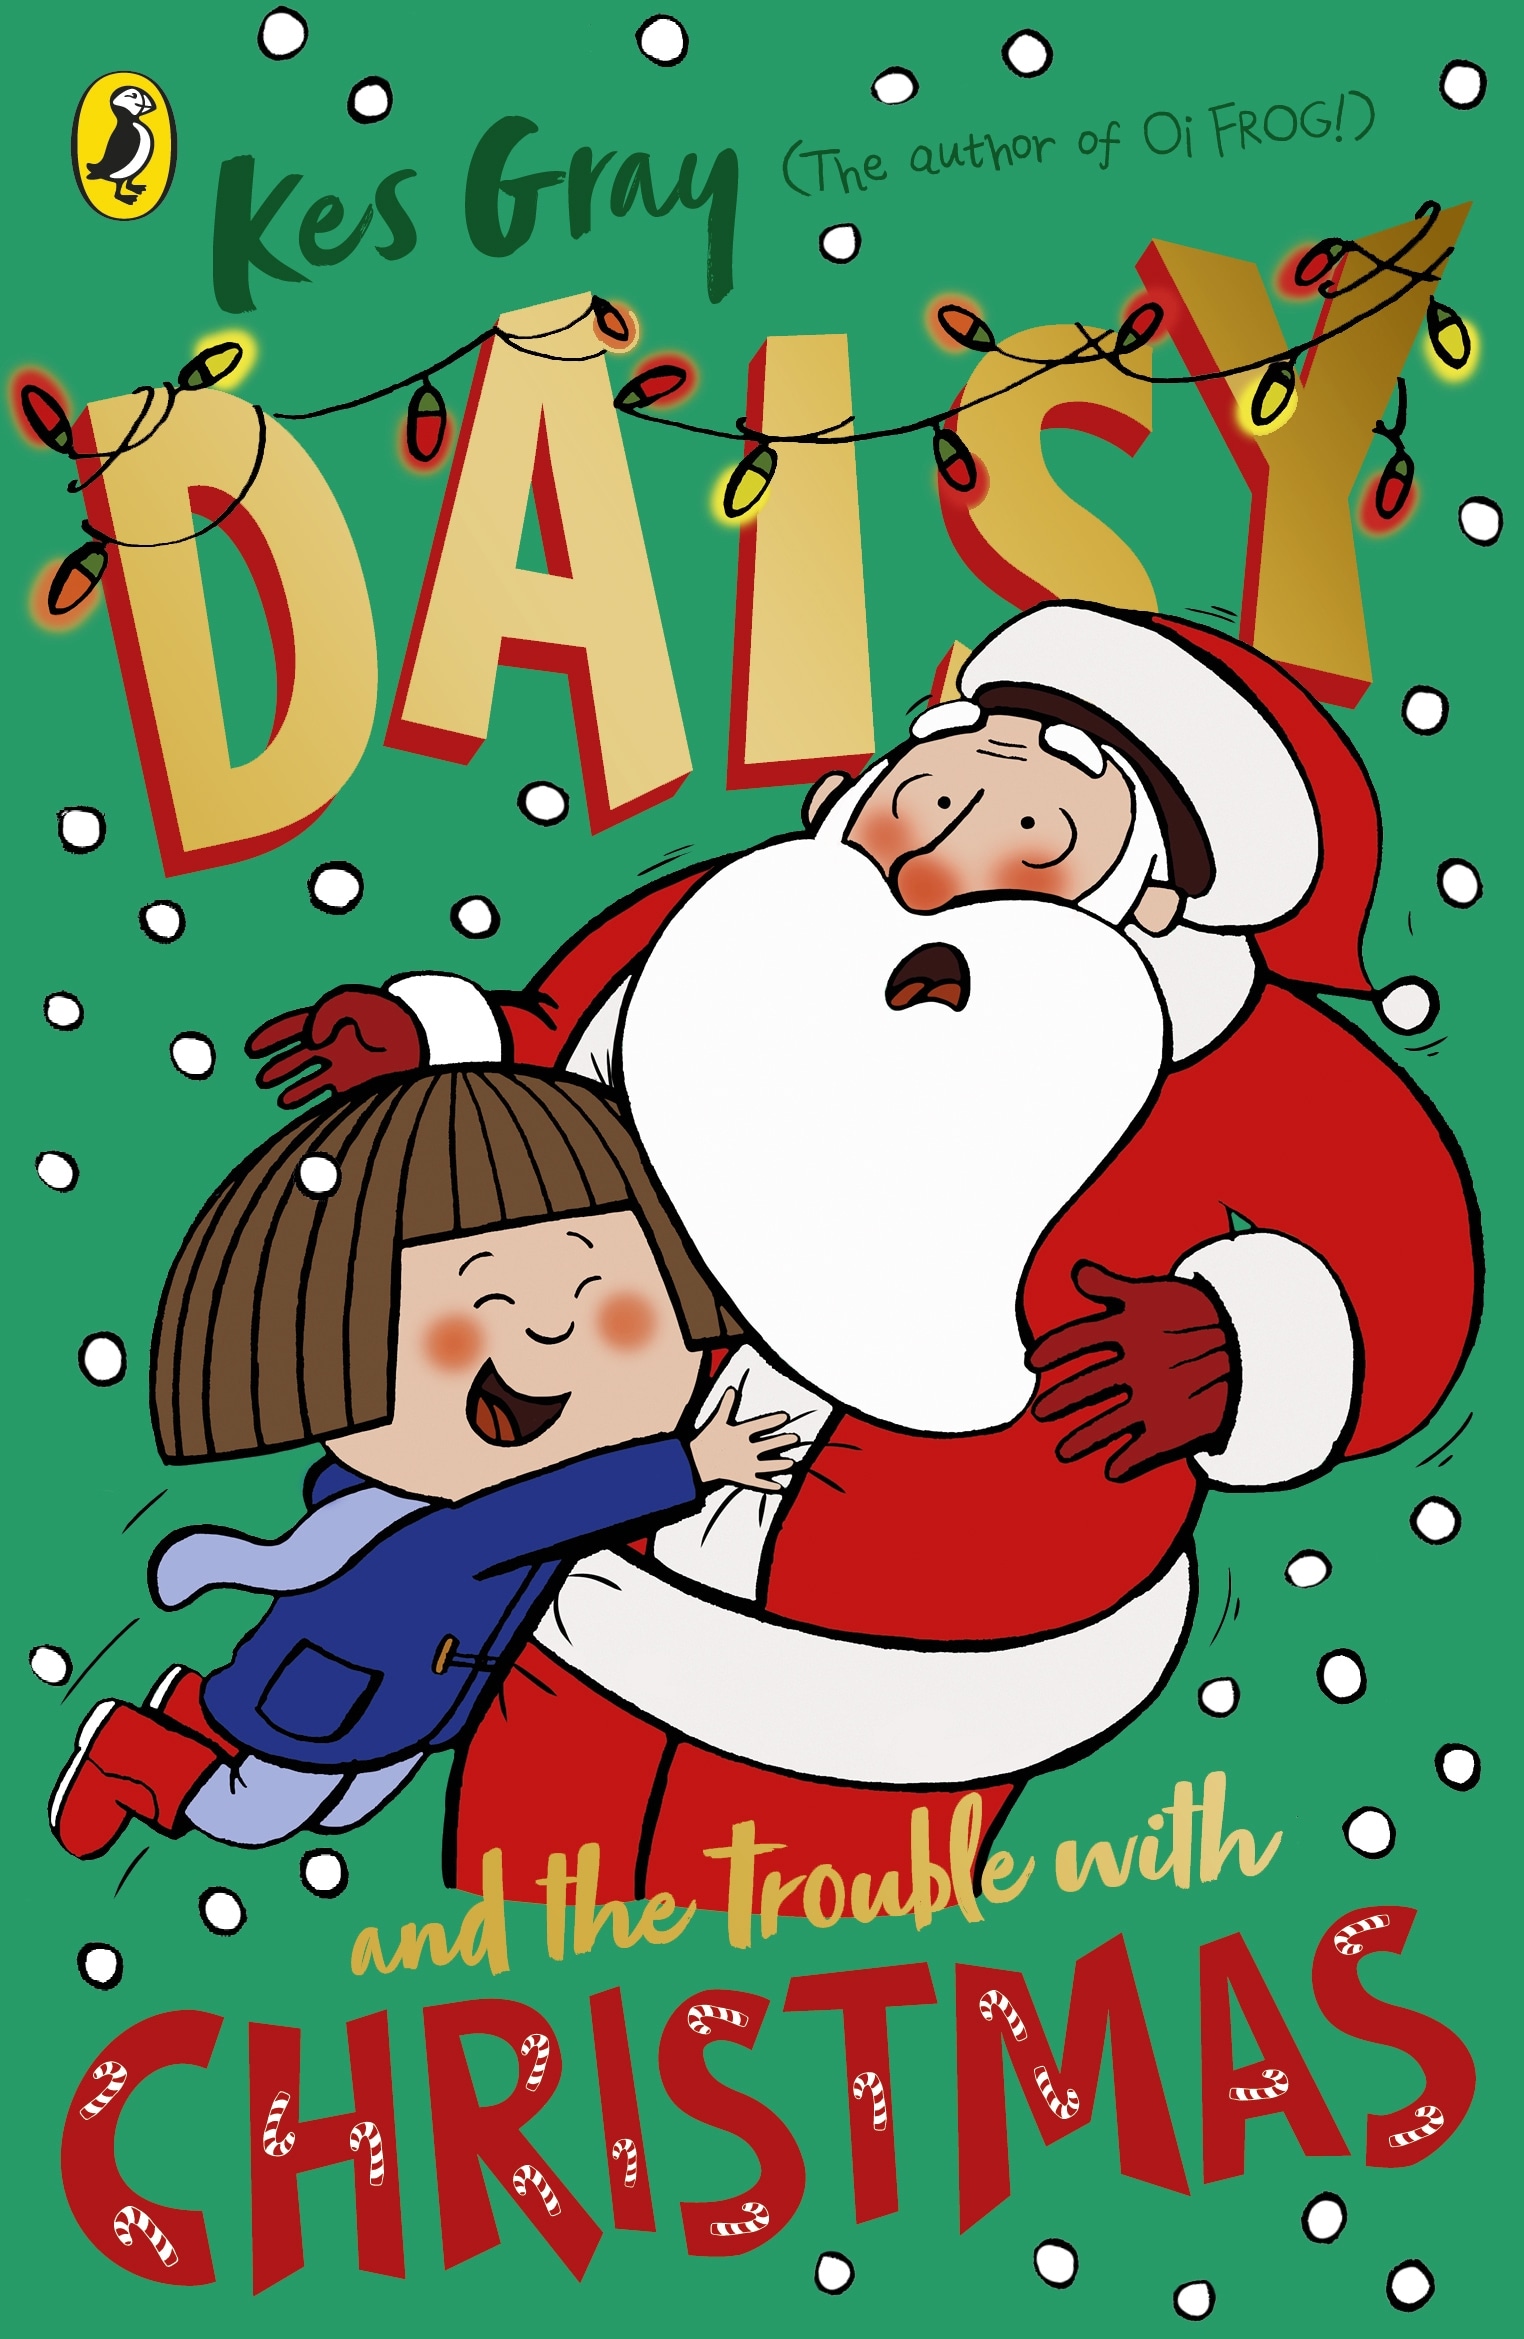 Book “Daisy and the Trouble with Christmas” by Kes Gray — October 1, 2020